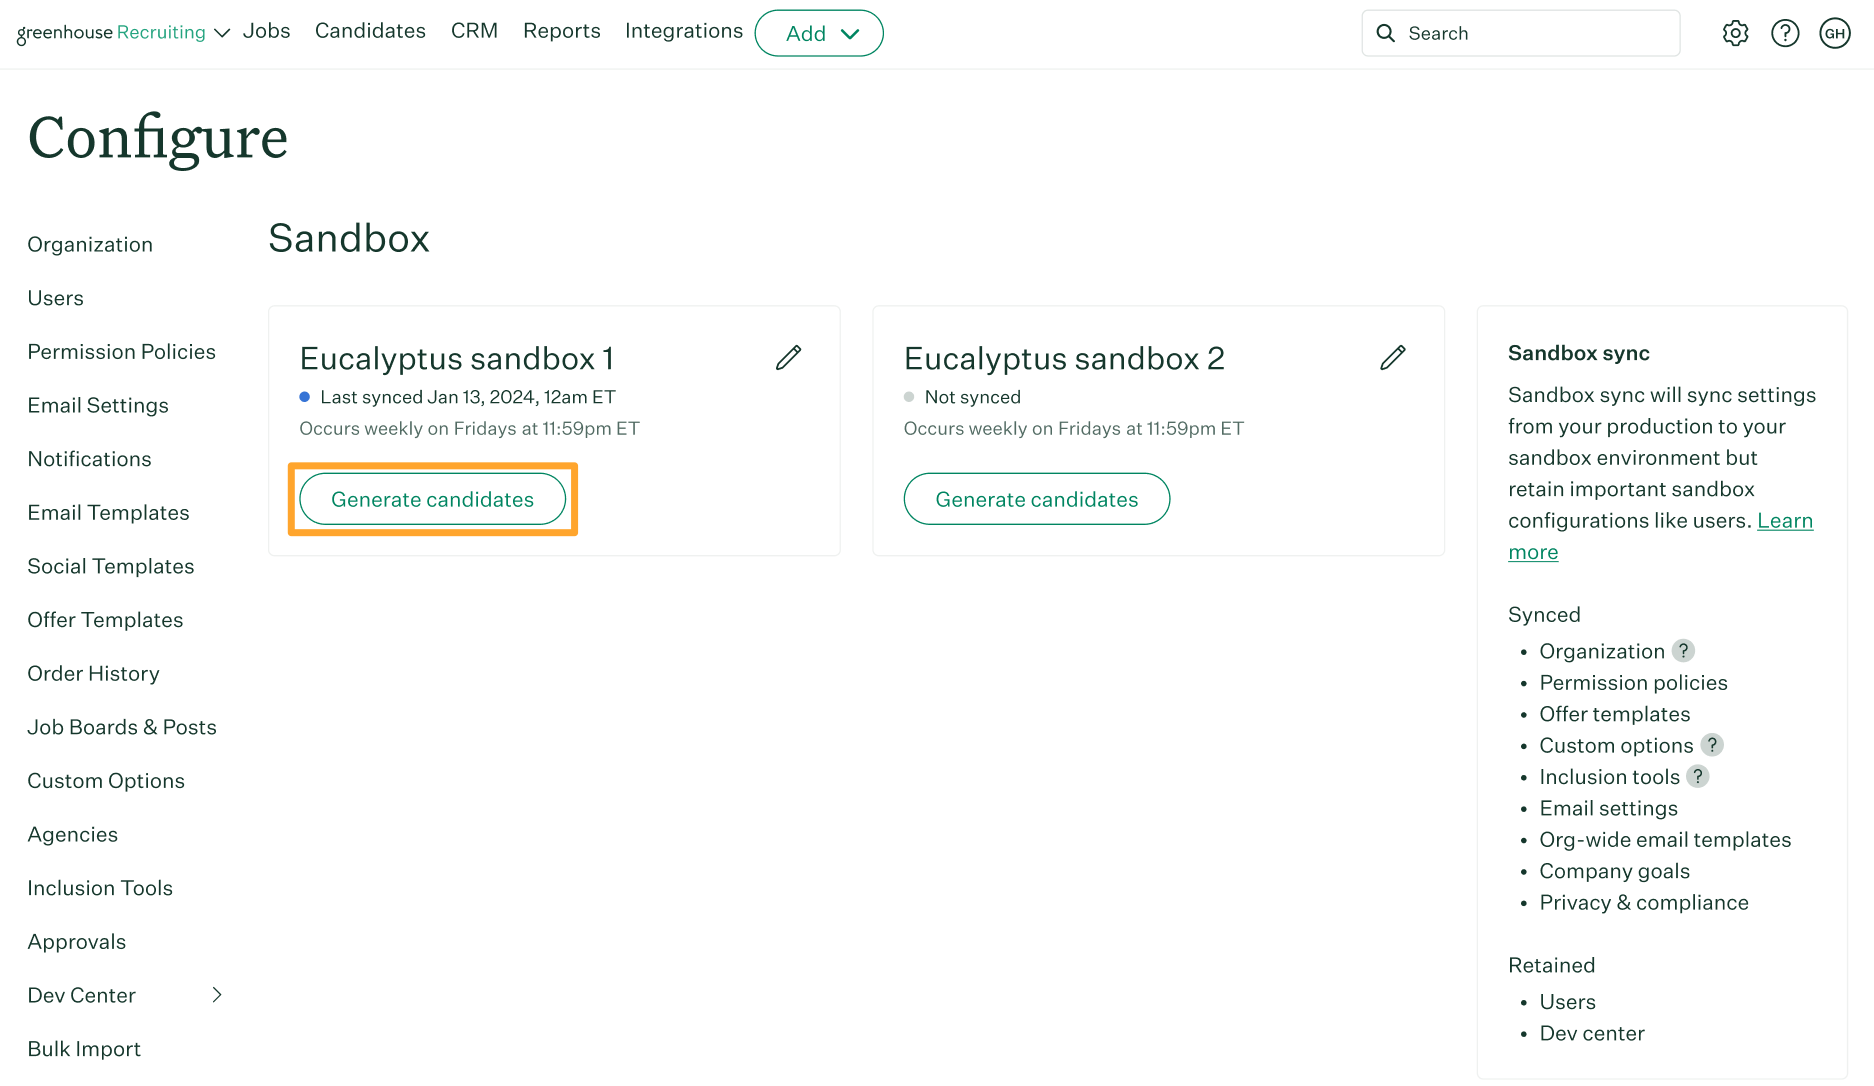 The sandbox configure page shows two sandbox environments named Eucalyptus 1 and Eucalyptus 2 with the Generate candidates button highlighted under Eucalyptus sandbox 1